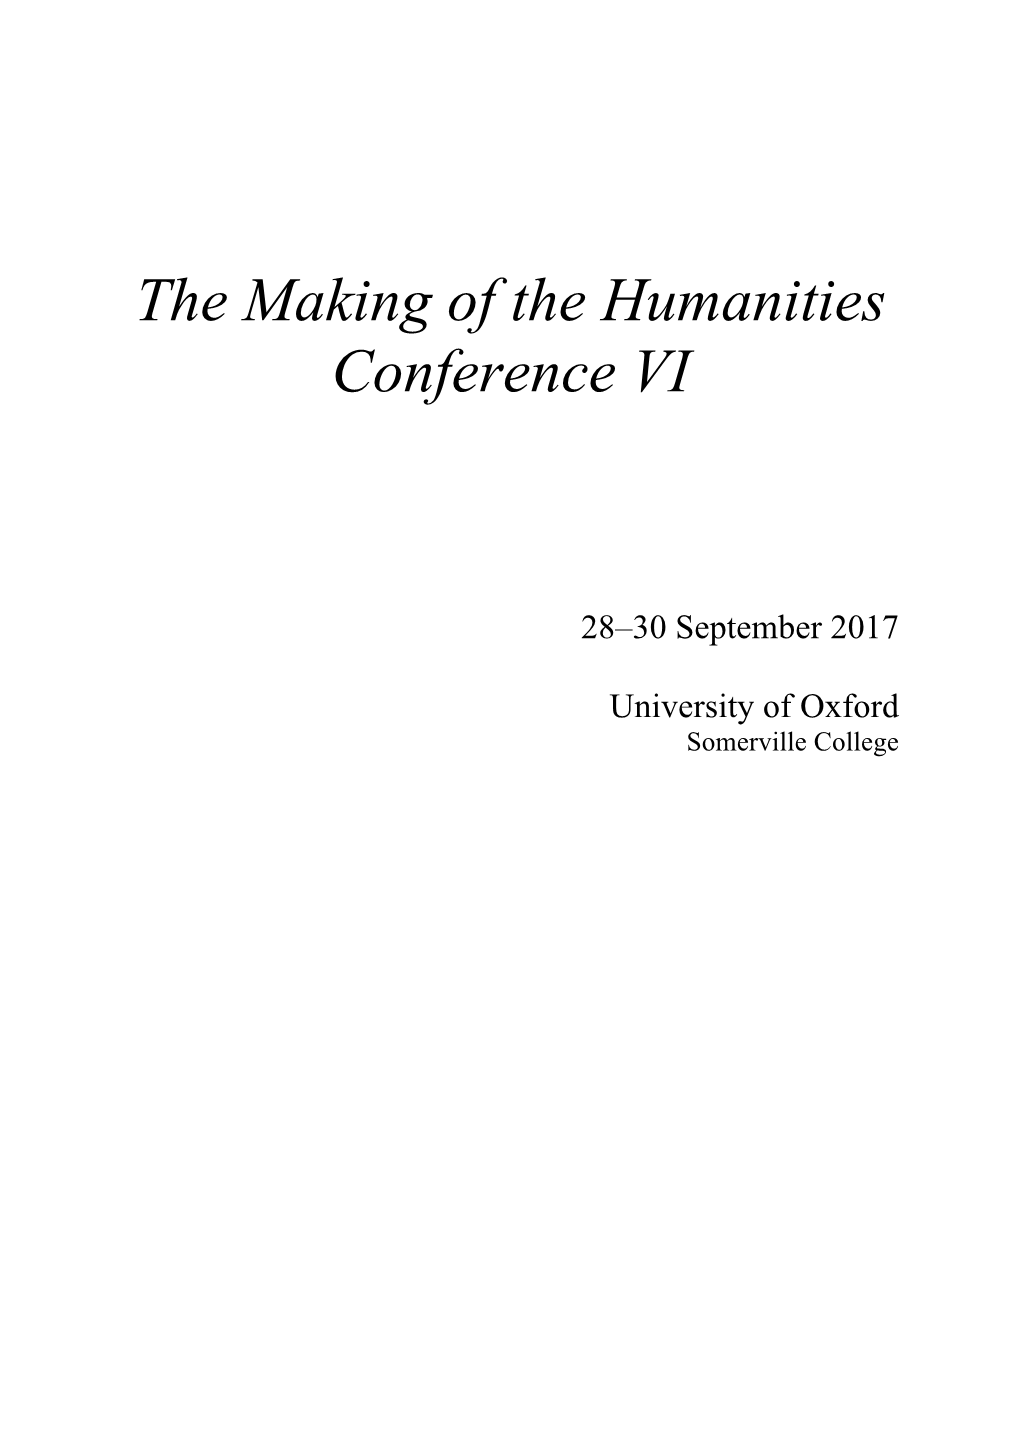 The Making of the Humanities Conference VI